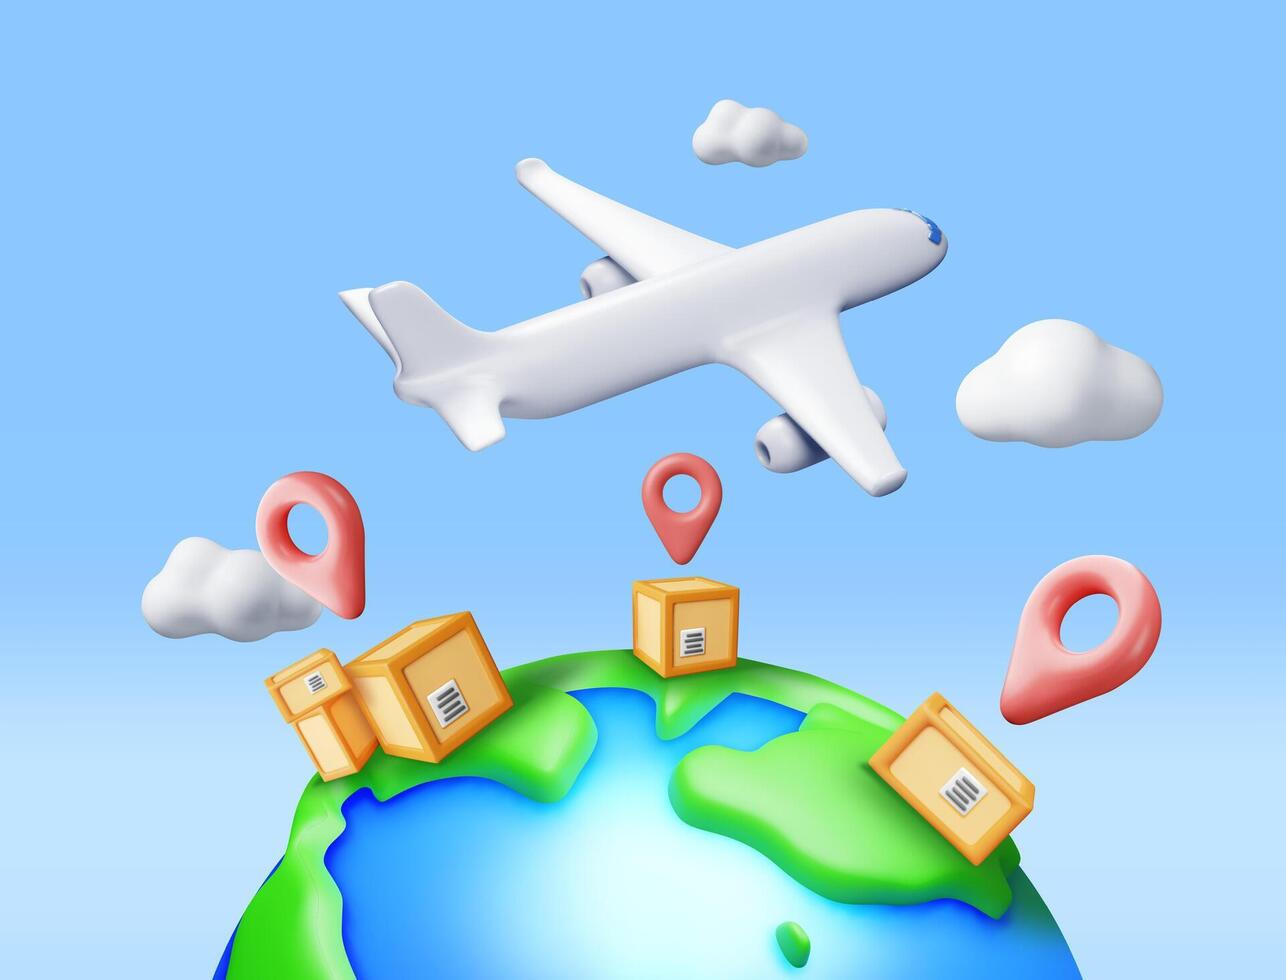 3D Delivery Airplane, Globe and Cardboard Box Isolated. Render Express Delivering Services Commercial Plane. Concept of Fast and Free Delivery by Aircraft. Cargo and Logistic. Vector Illustration